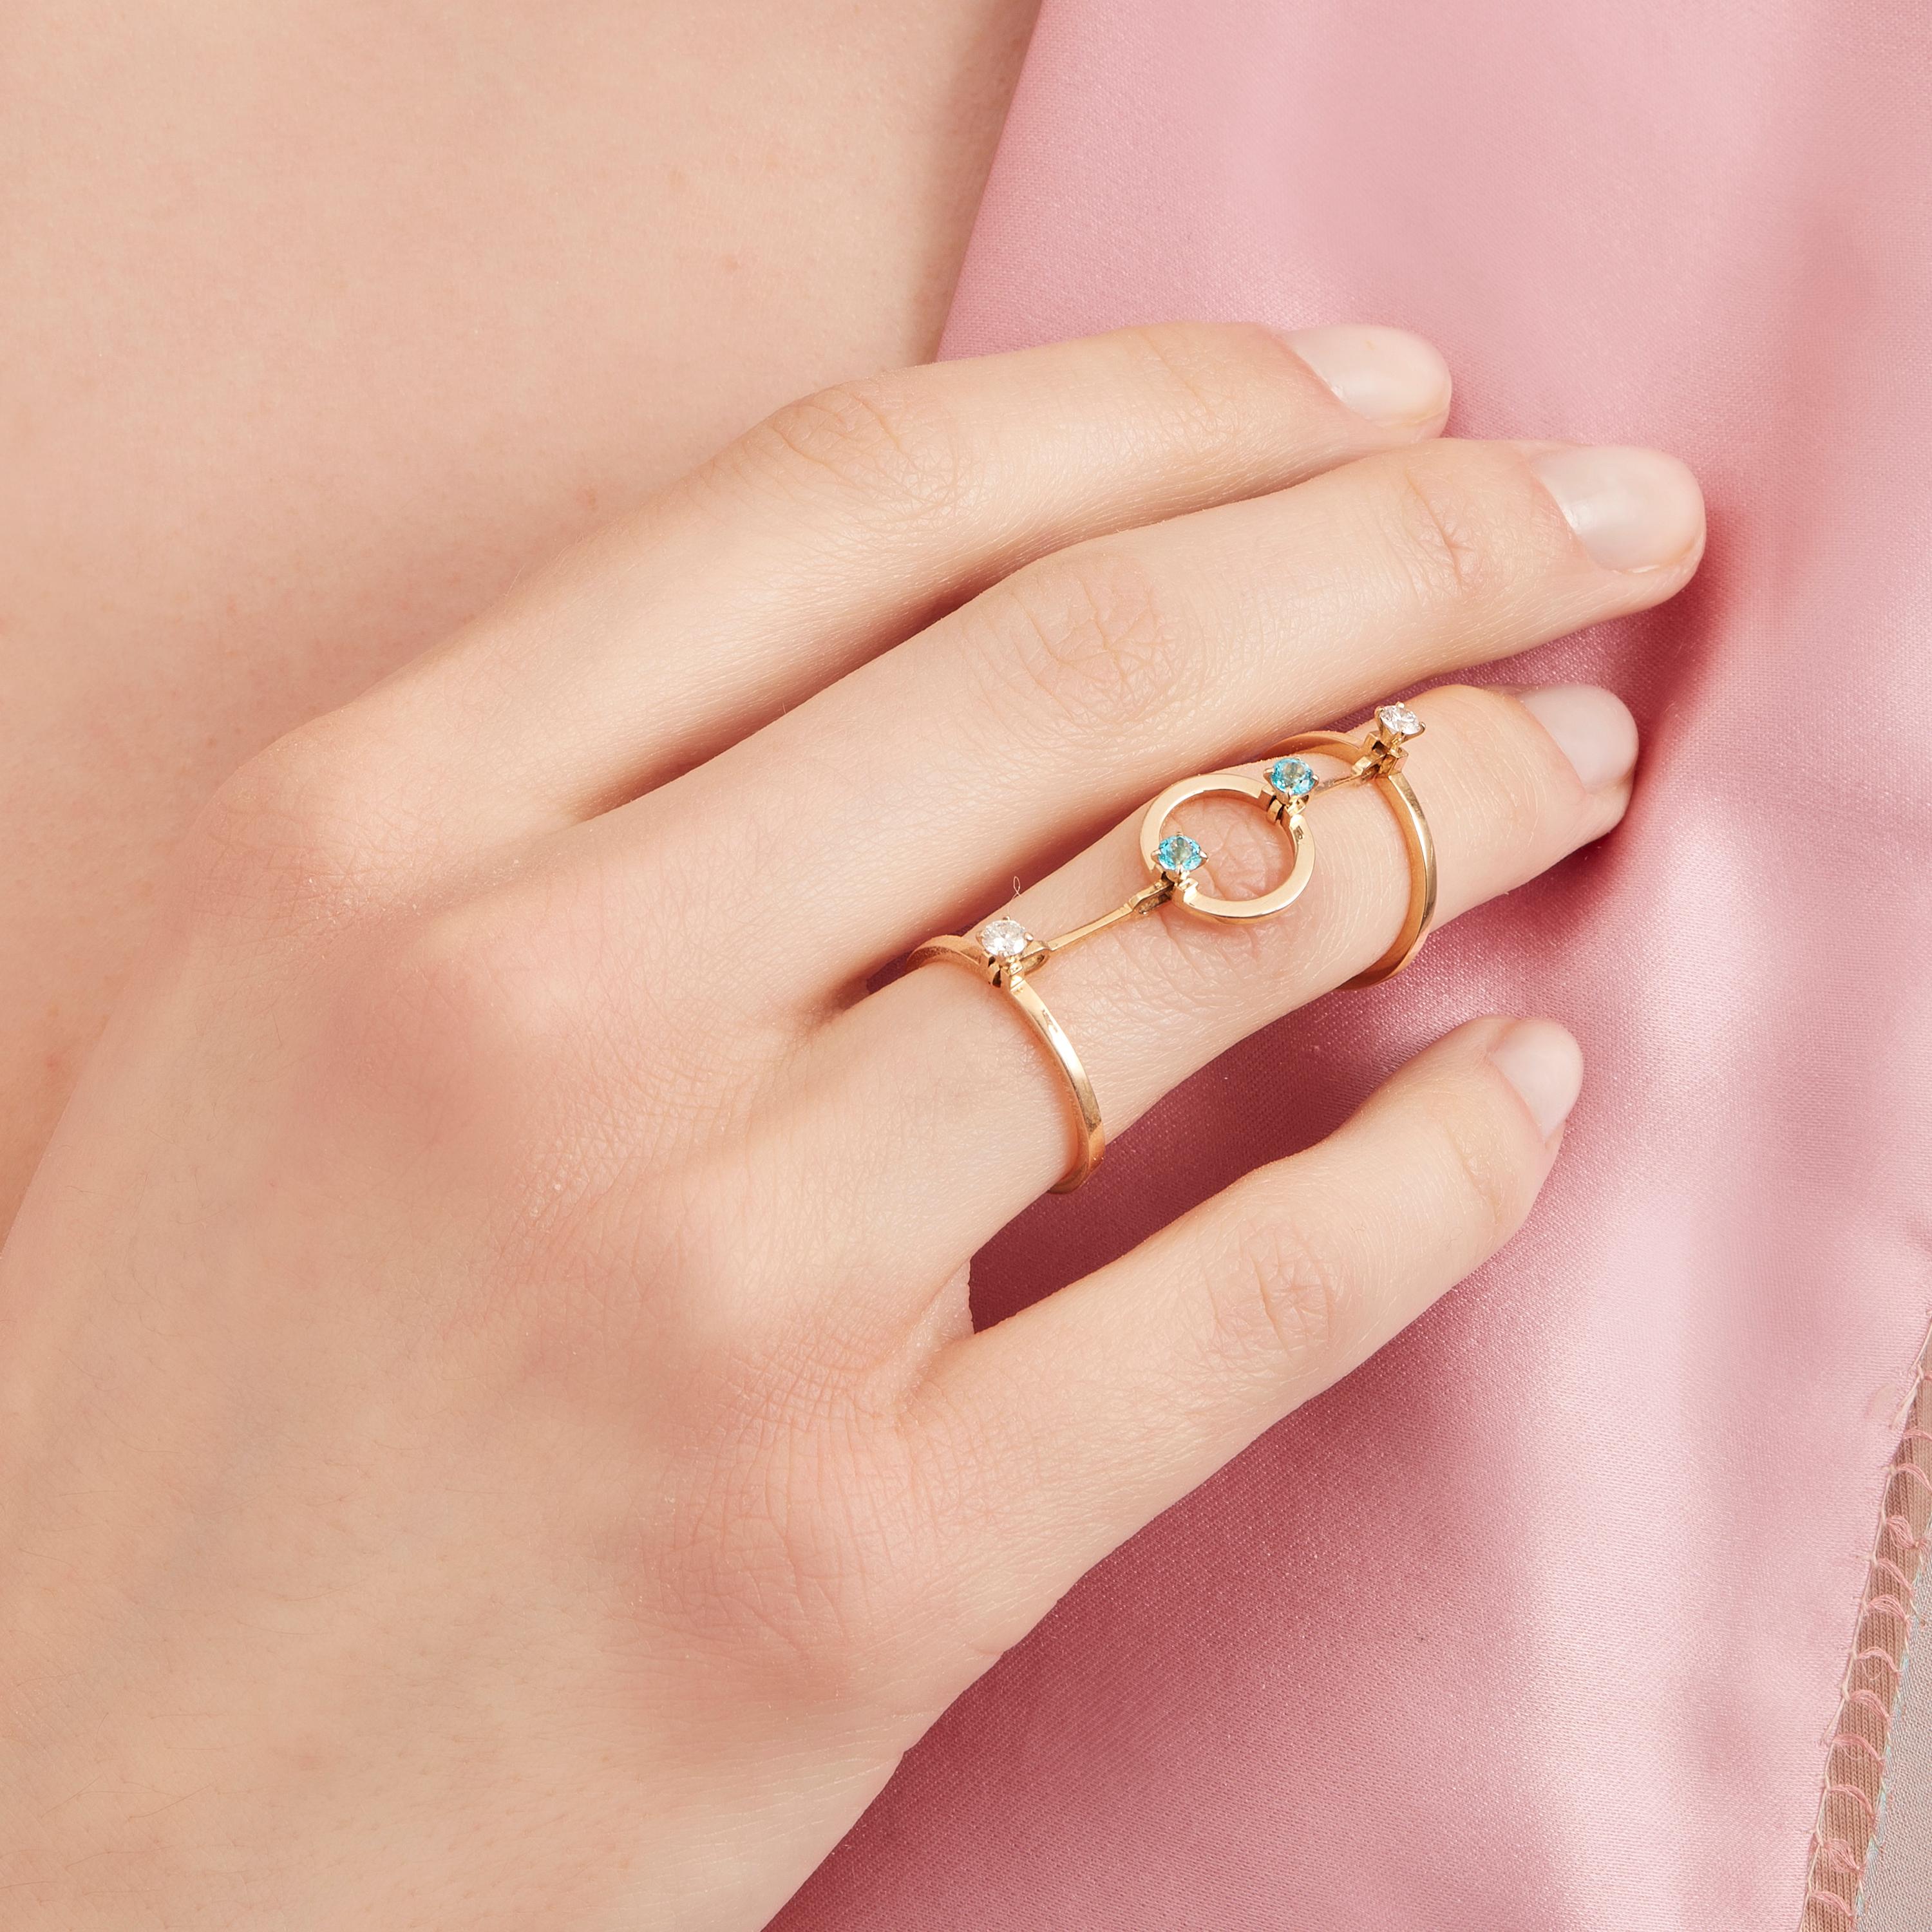 Made by hand in the Milanese atelier of Nathalie Jean, the limited edition Hoi An Ring is a graceful composition of articulated rings and bar links in rosé gold, a warm, sophisticated color close to yellow gold. Miniature articulations are cleverly